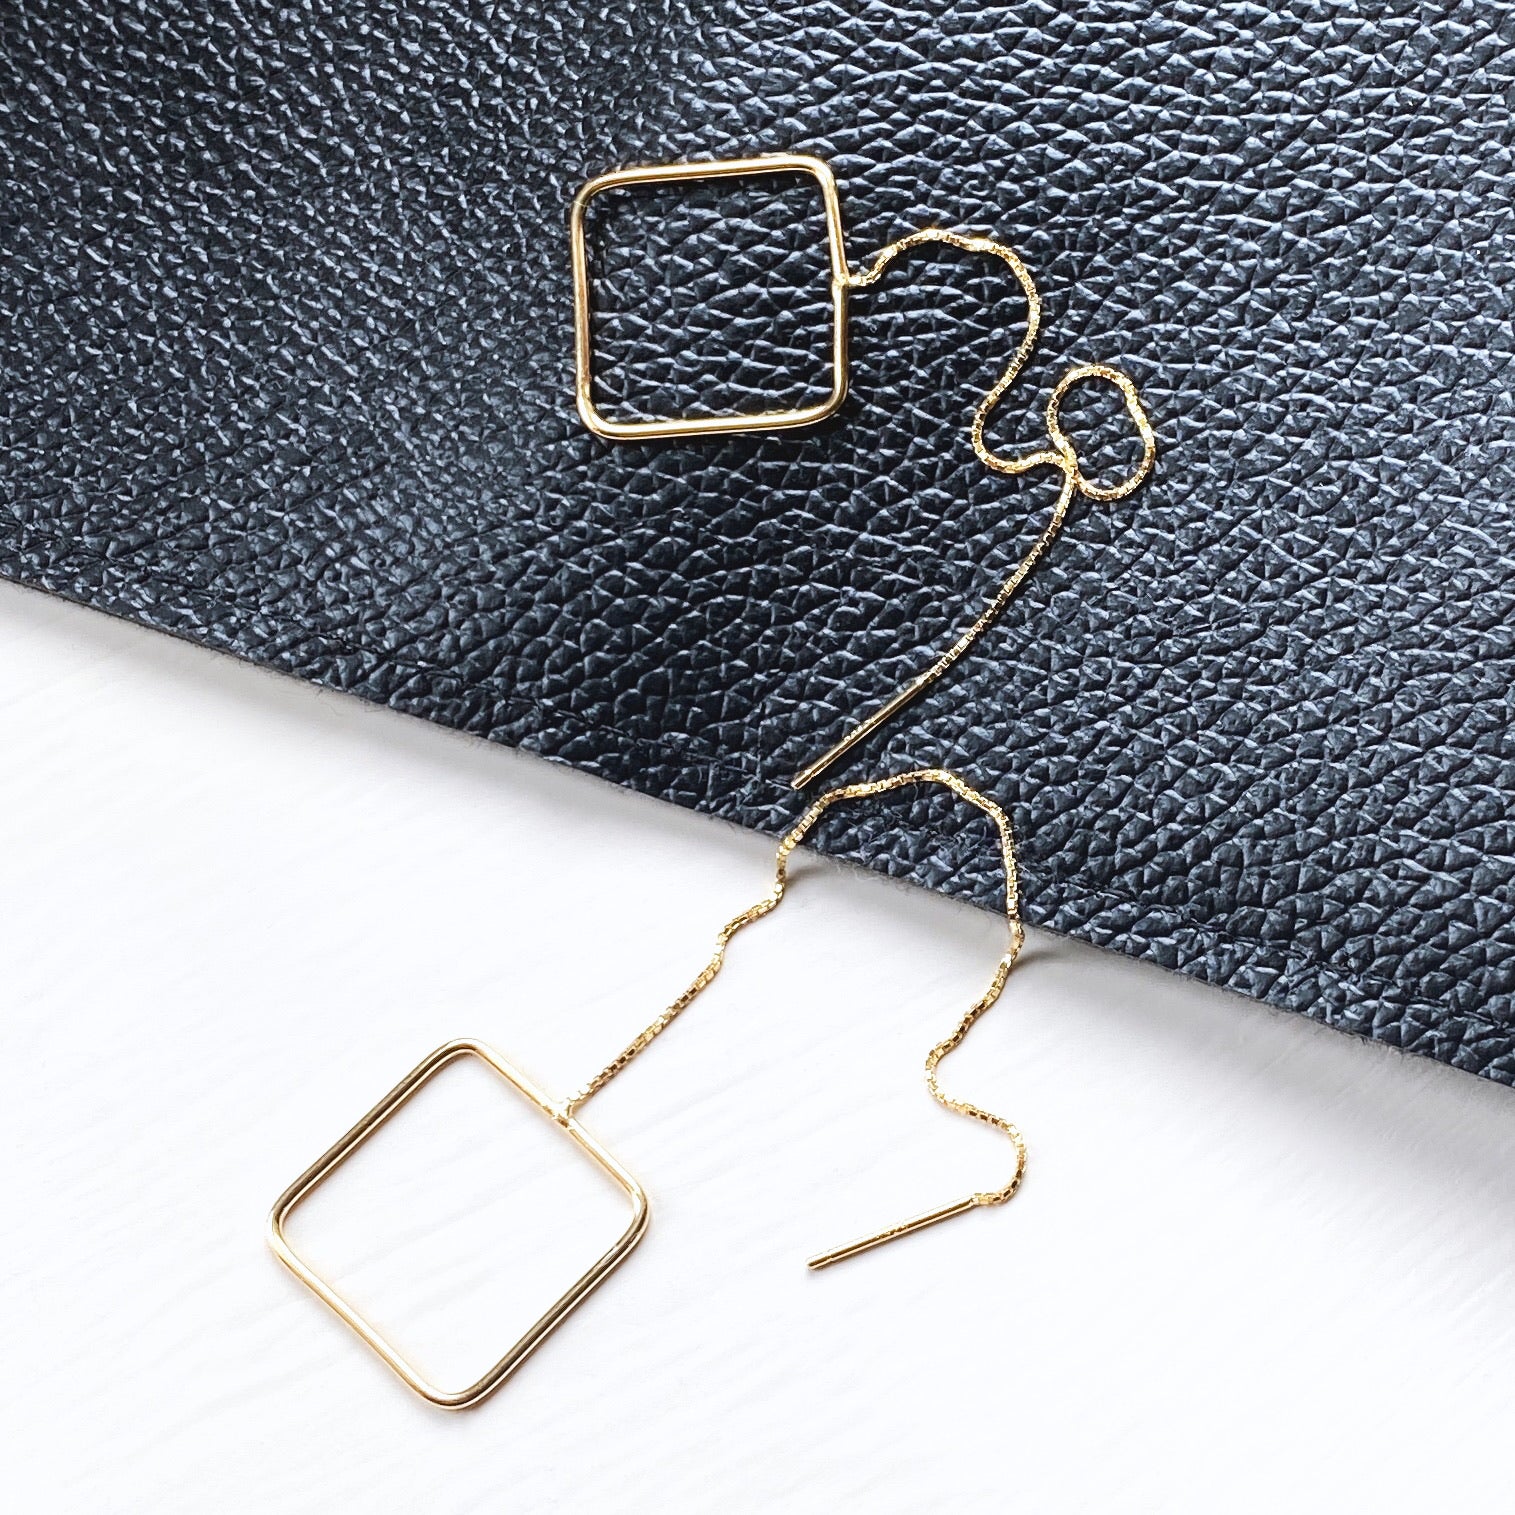 Square Long Chain Earrings, 14ct Gold Plate